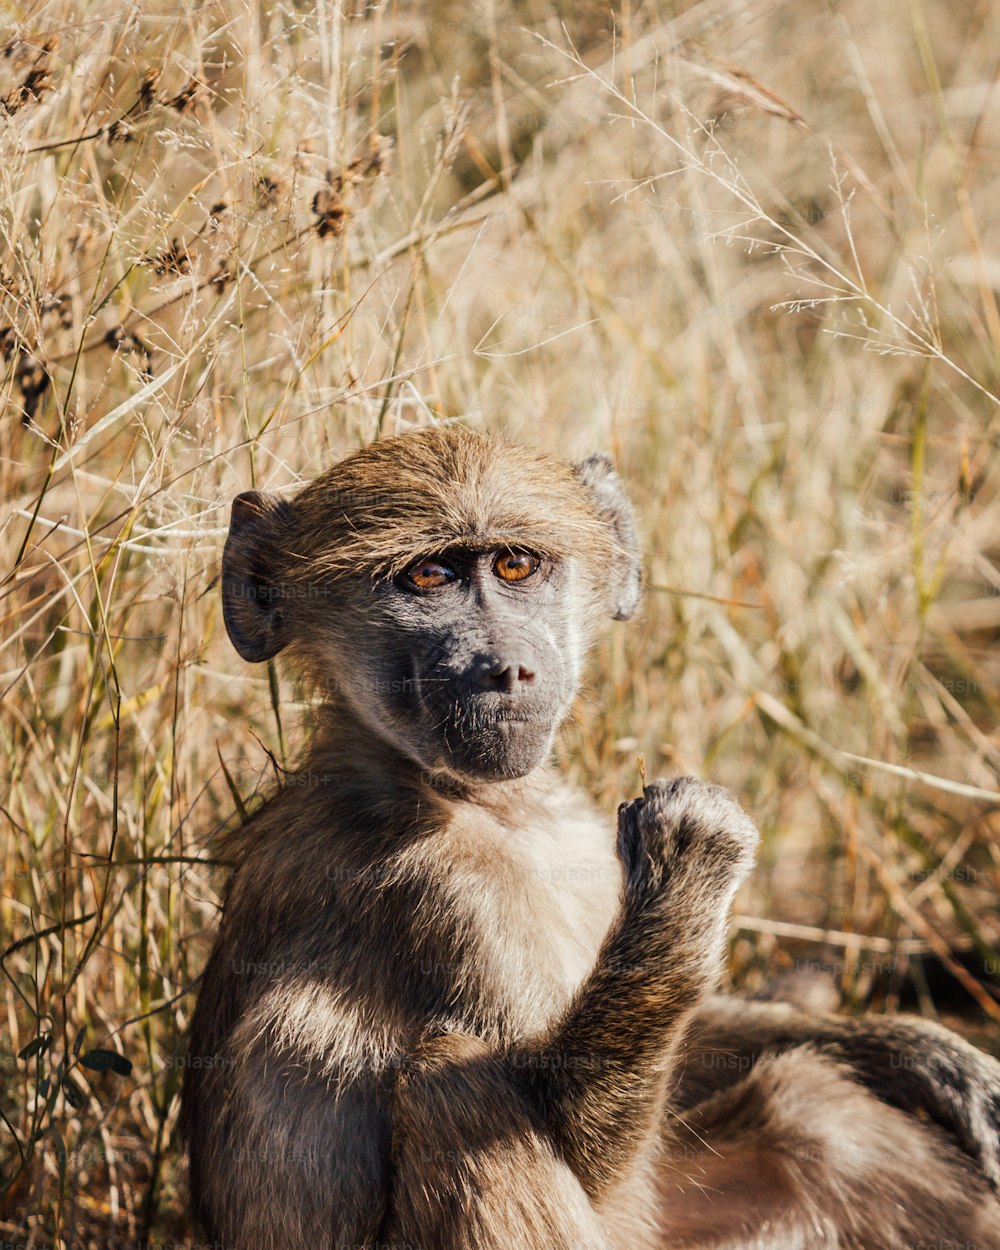 a monkey sitting in the middle of a field